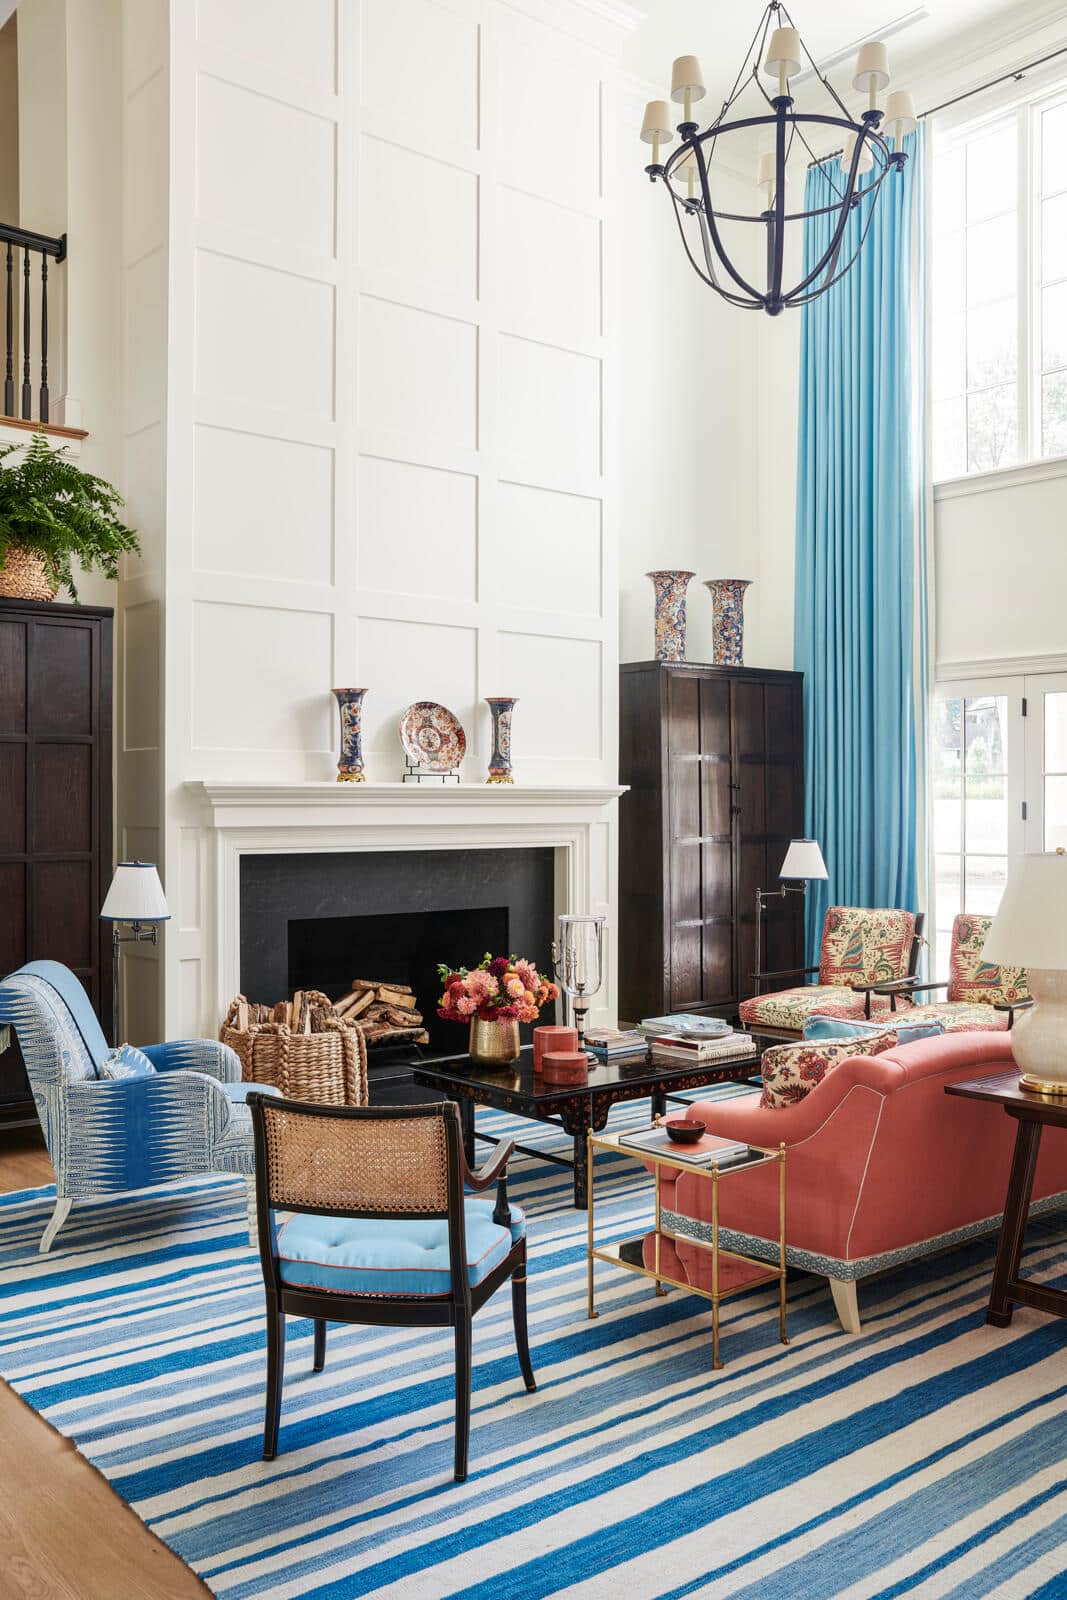 Designer:  Mark D Sikes @markdsikes & @markdsikes_interiors Photographer: Amy Neunsinger @amyneunsinger Stylist: Carolyn Englefield @carolynenglefield |This Kansas City home stands as a testament to the power of design to bring beauty and joy to our lives.